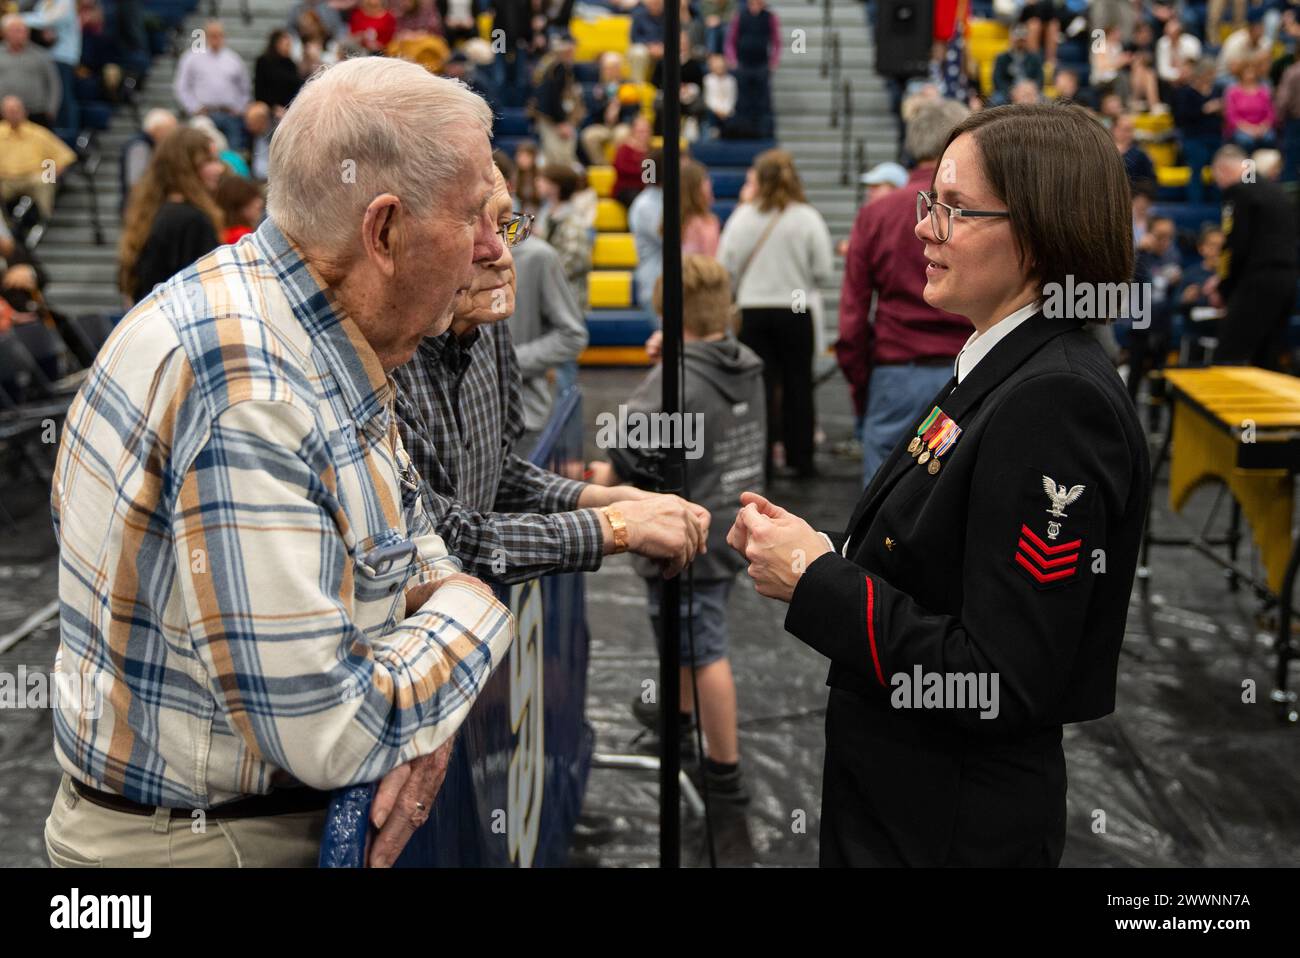 240214-N-PN185-1009 – Soddy-Daisy, Tennessee (Feb. 14, 2024) - Musician 1st Class Sarah Demy, from Burke, Virginia, speaks with an audience member during intermission at the United States Navy Band performance in the Soddy-Daisy High School Gymnasium as part of the unit’s 2024 national tour.  The Navy Band will travel 2500 ground miles over 18 days to 7 states, giving 12 public concerts as well as 5 concerts for students in schools.  Navy Stock Photo